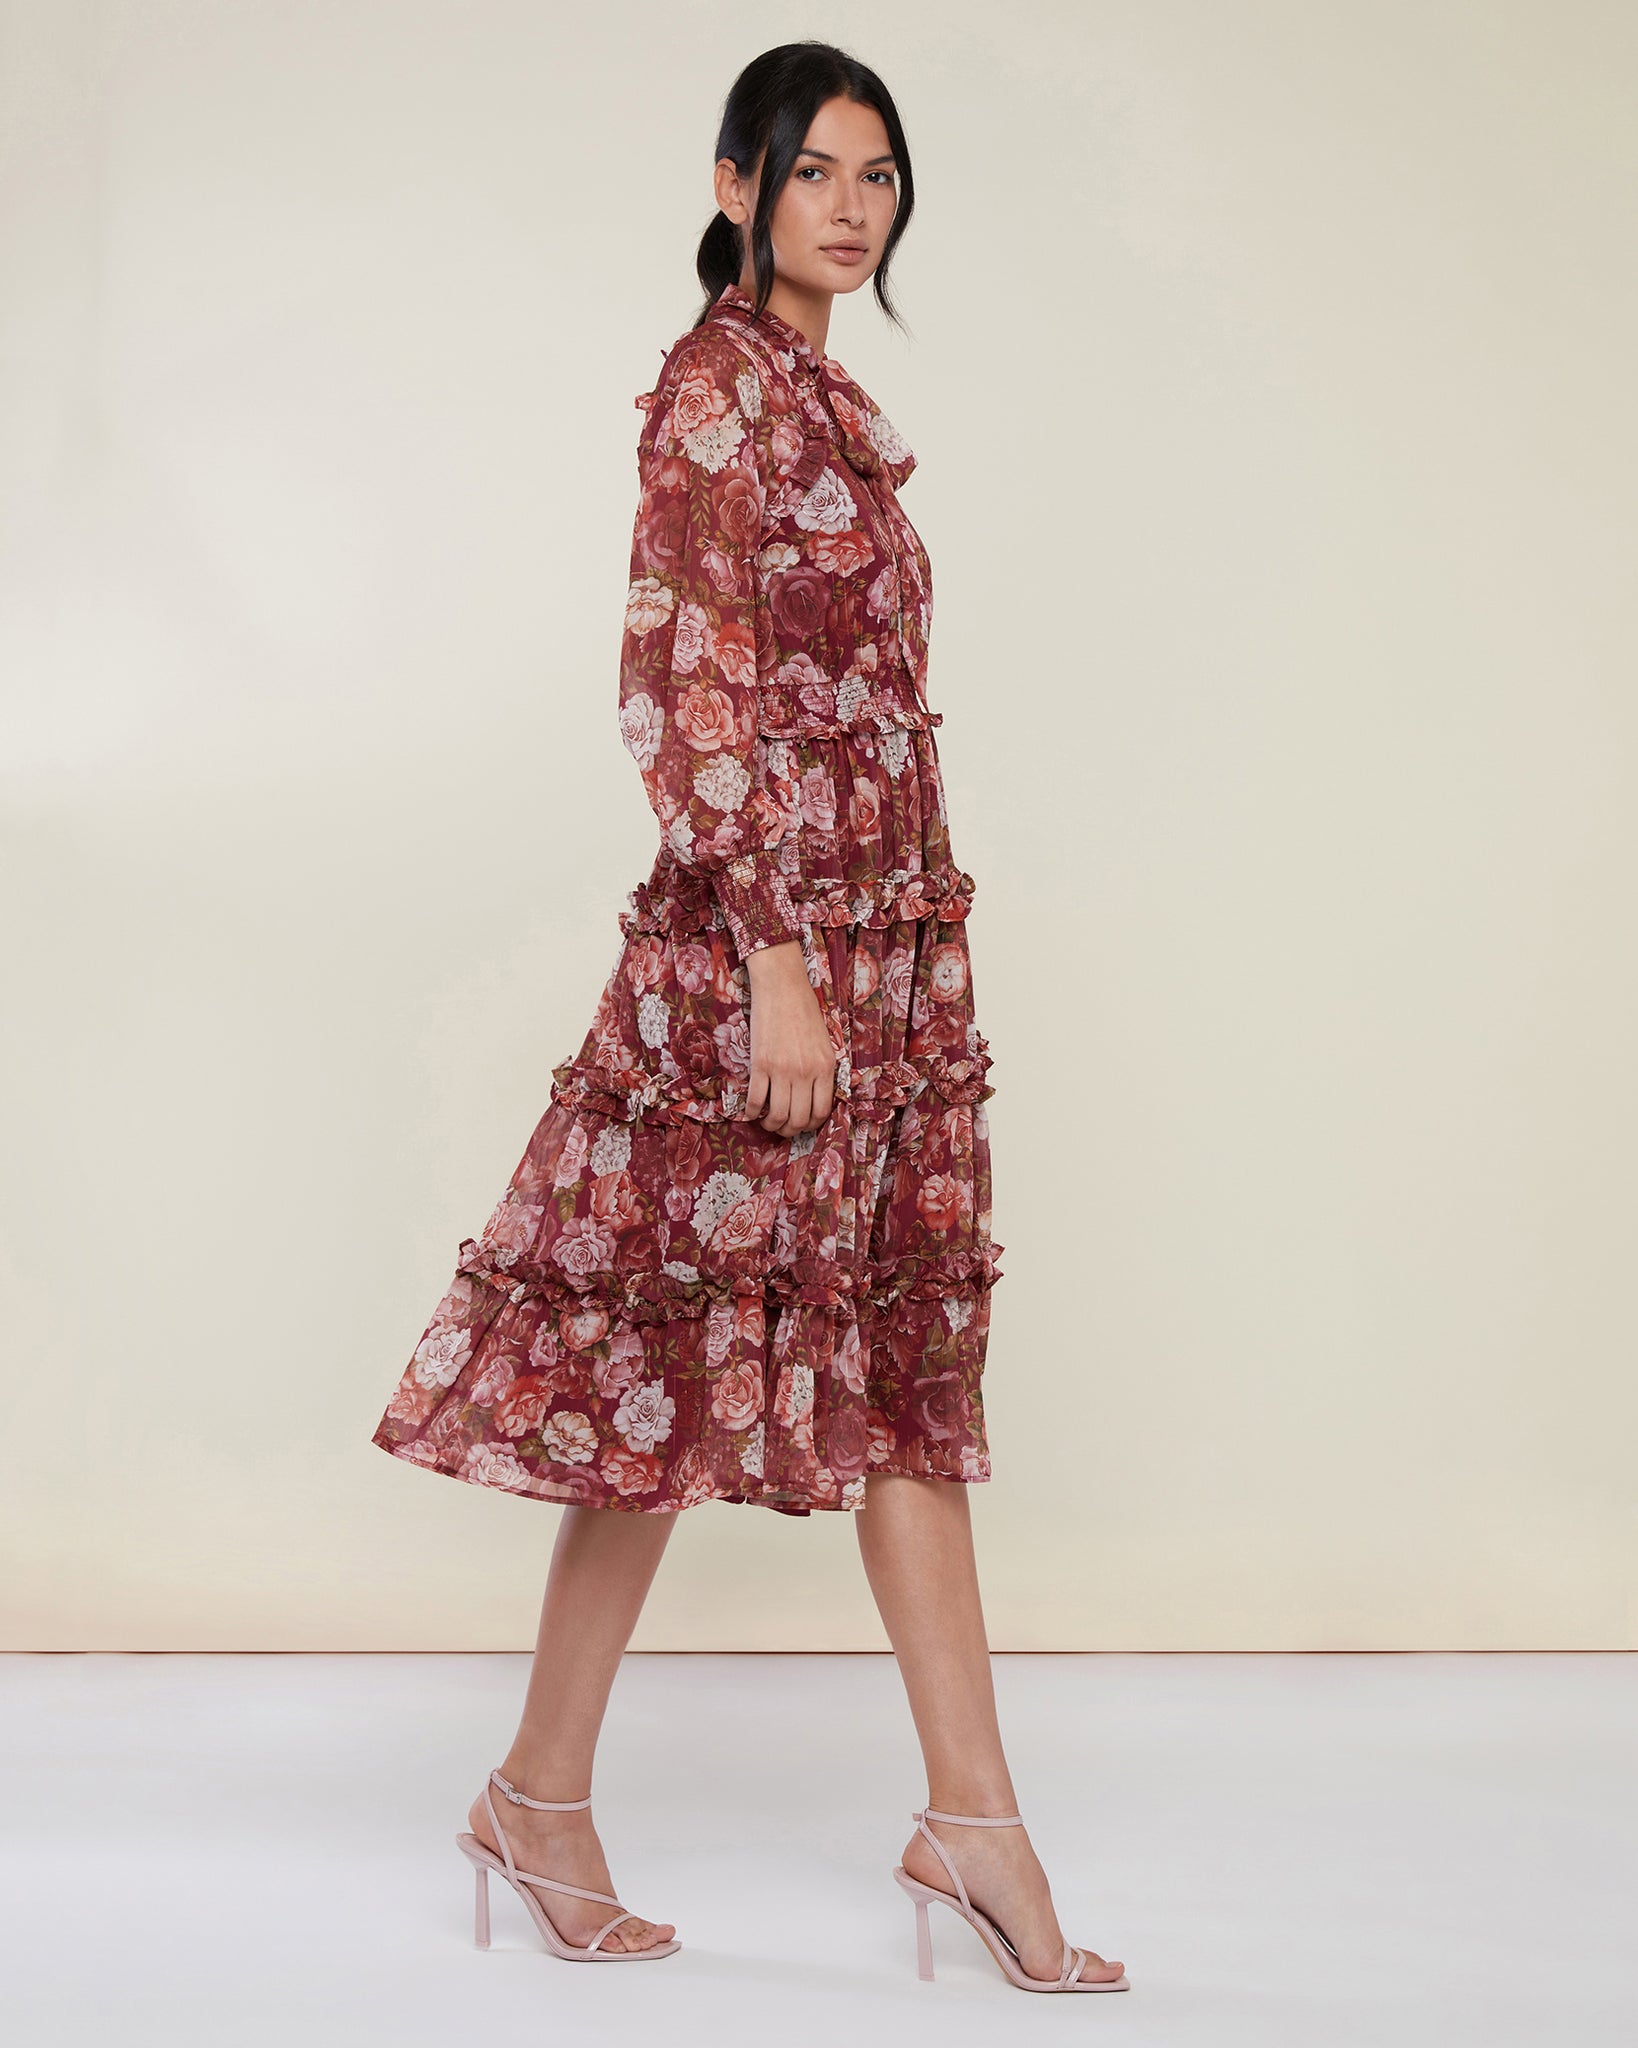 Photo of model wearing Smocked Ruffle Midi Dress in a red wine floral print from Rachel Parcell available at UniKoncept in Waterloo